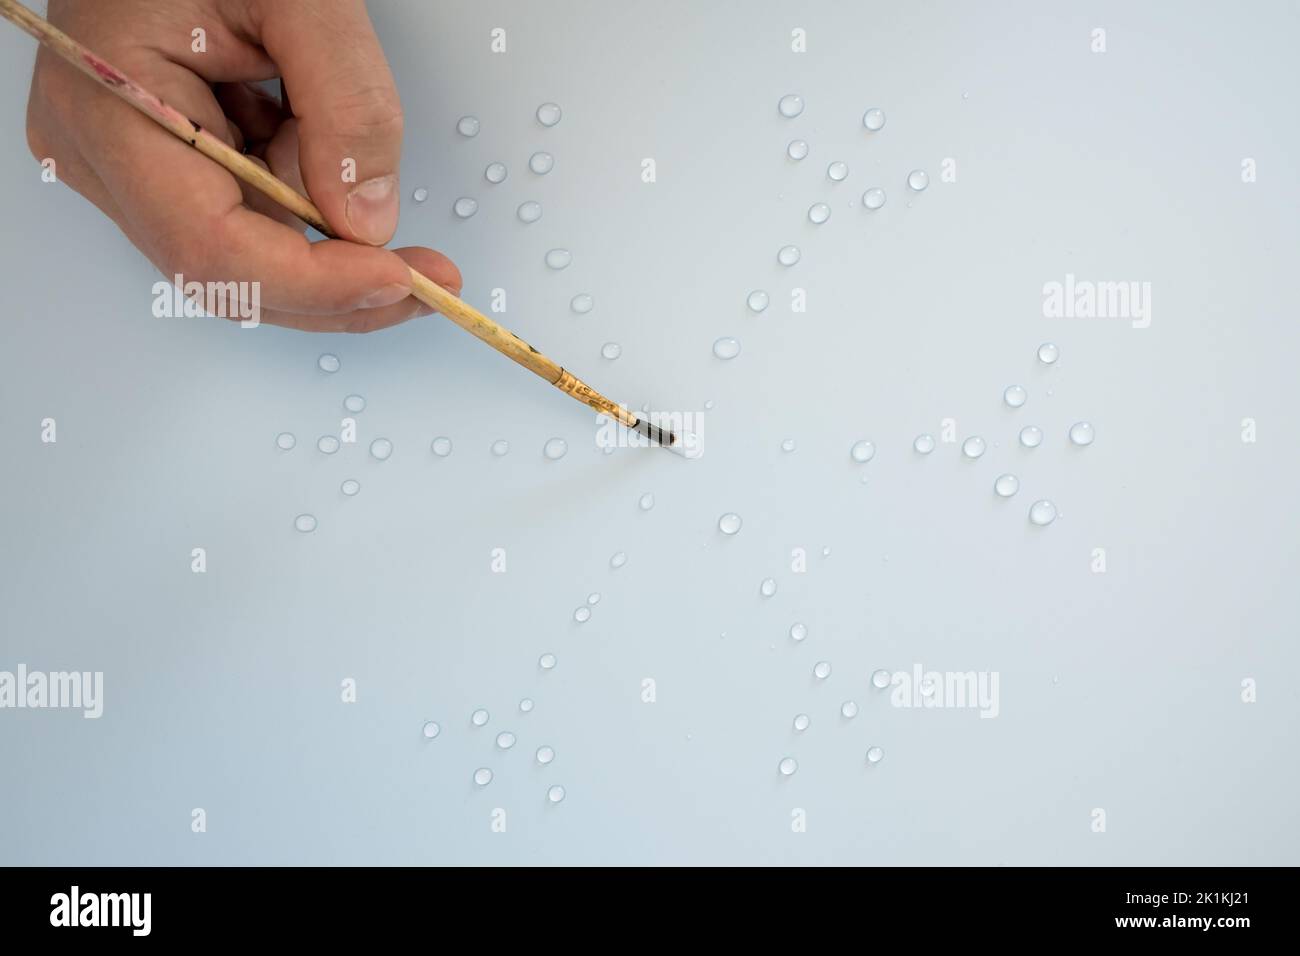 Male hand with a drawing brush draws a snowflake from water drops, on a gray background. Flat lay. Top view.  Stock Photo